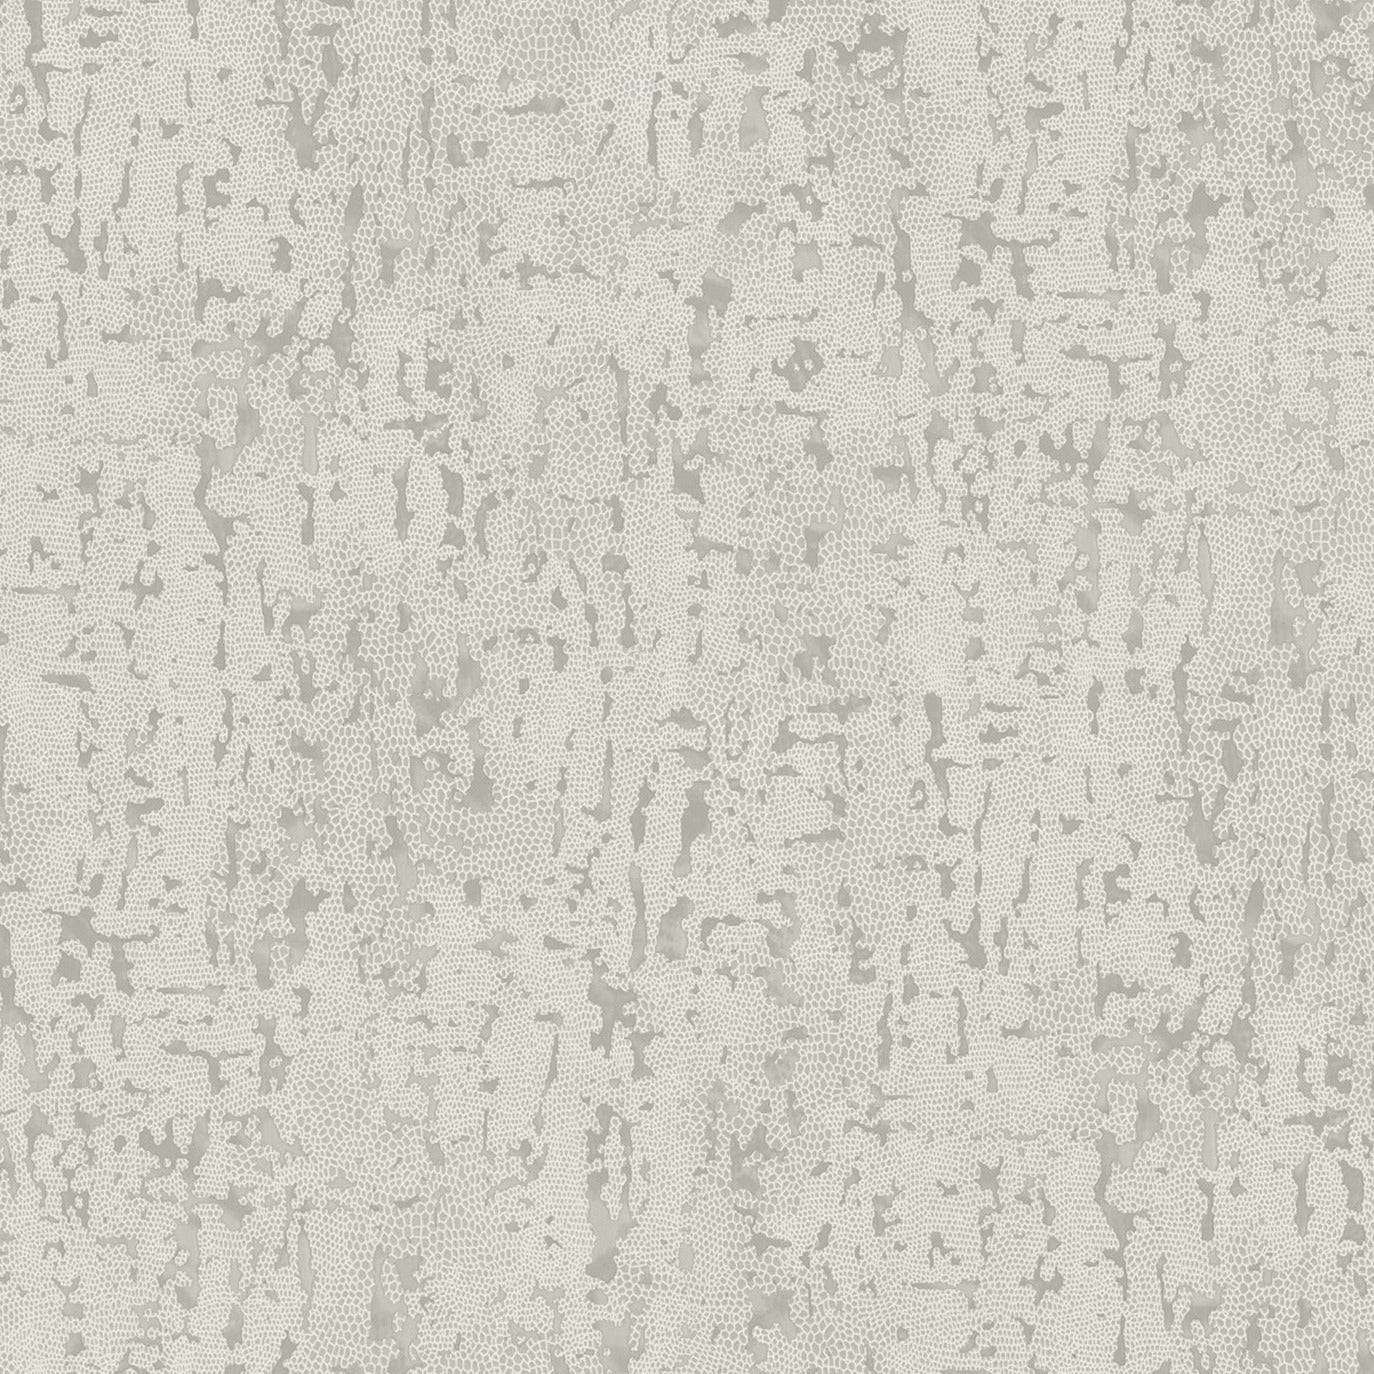 Looking for 2949-60208 Imprint Malawi Light Grey Leather Texture Grey A-Street Prints Wallpaper